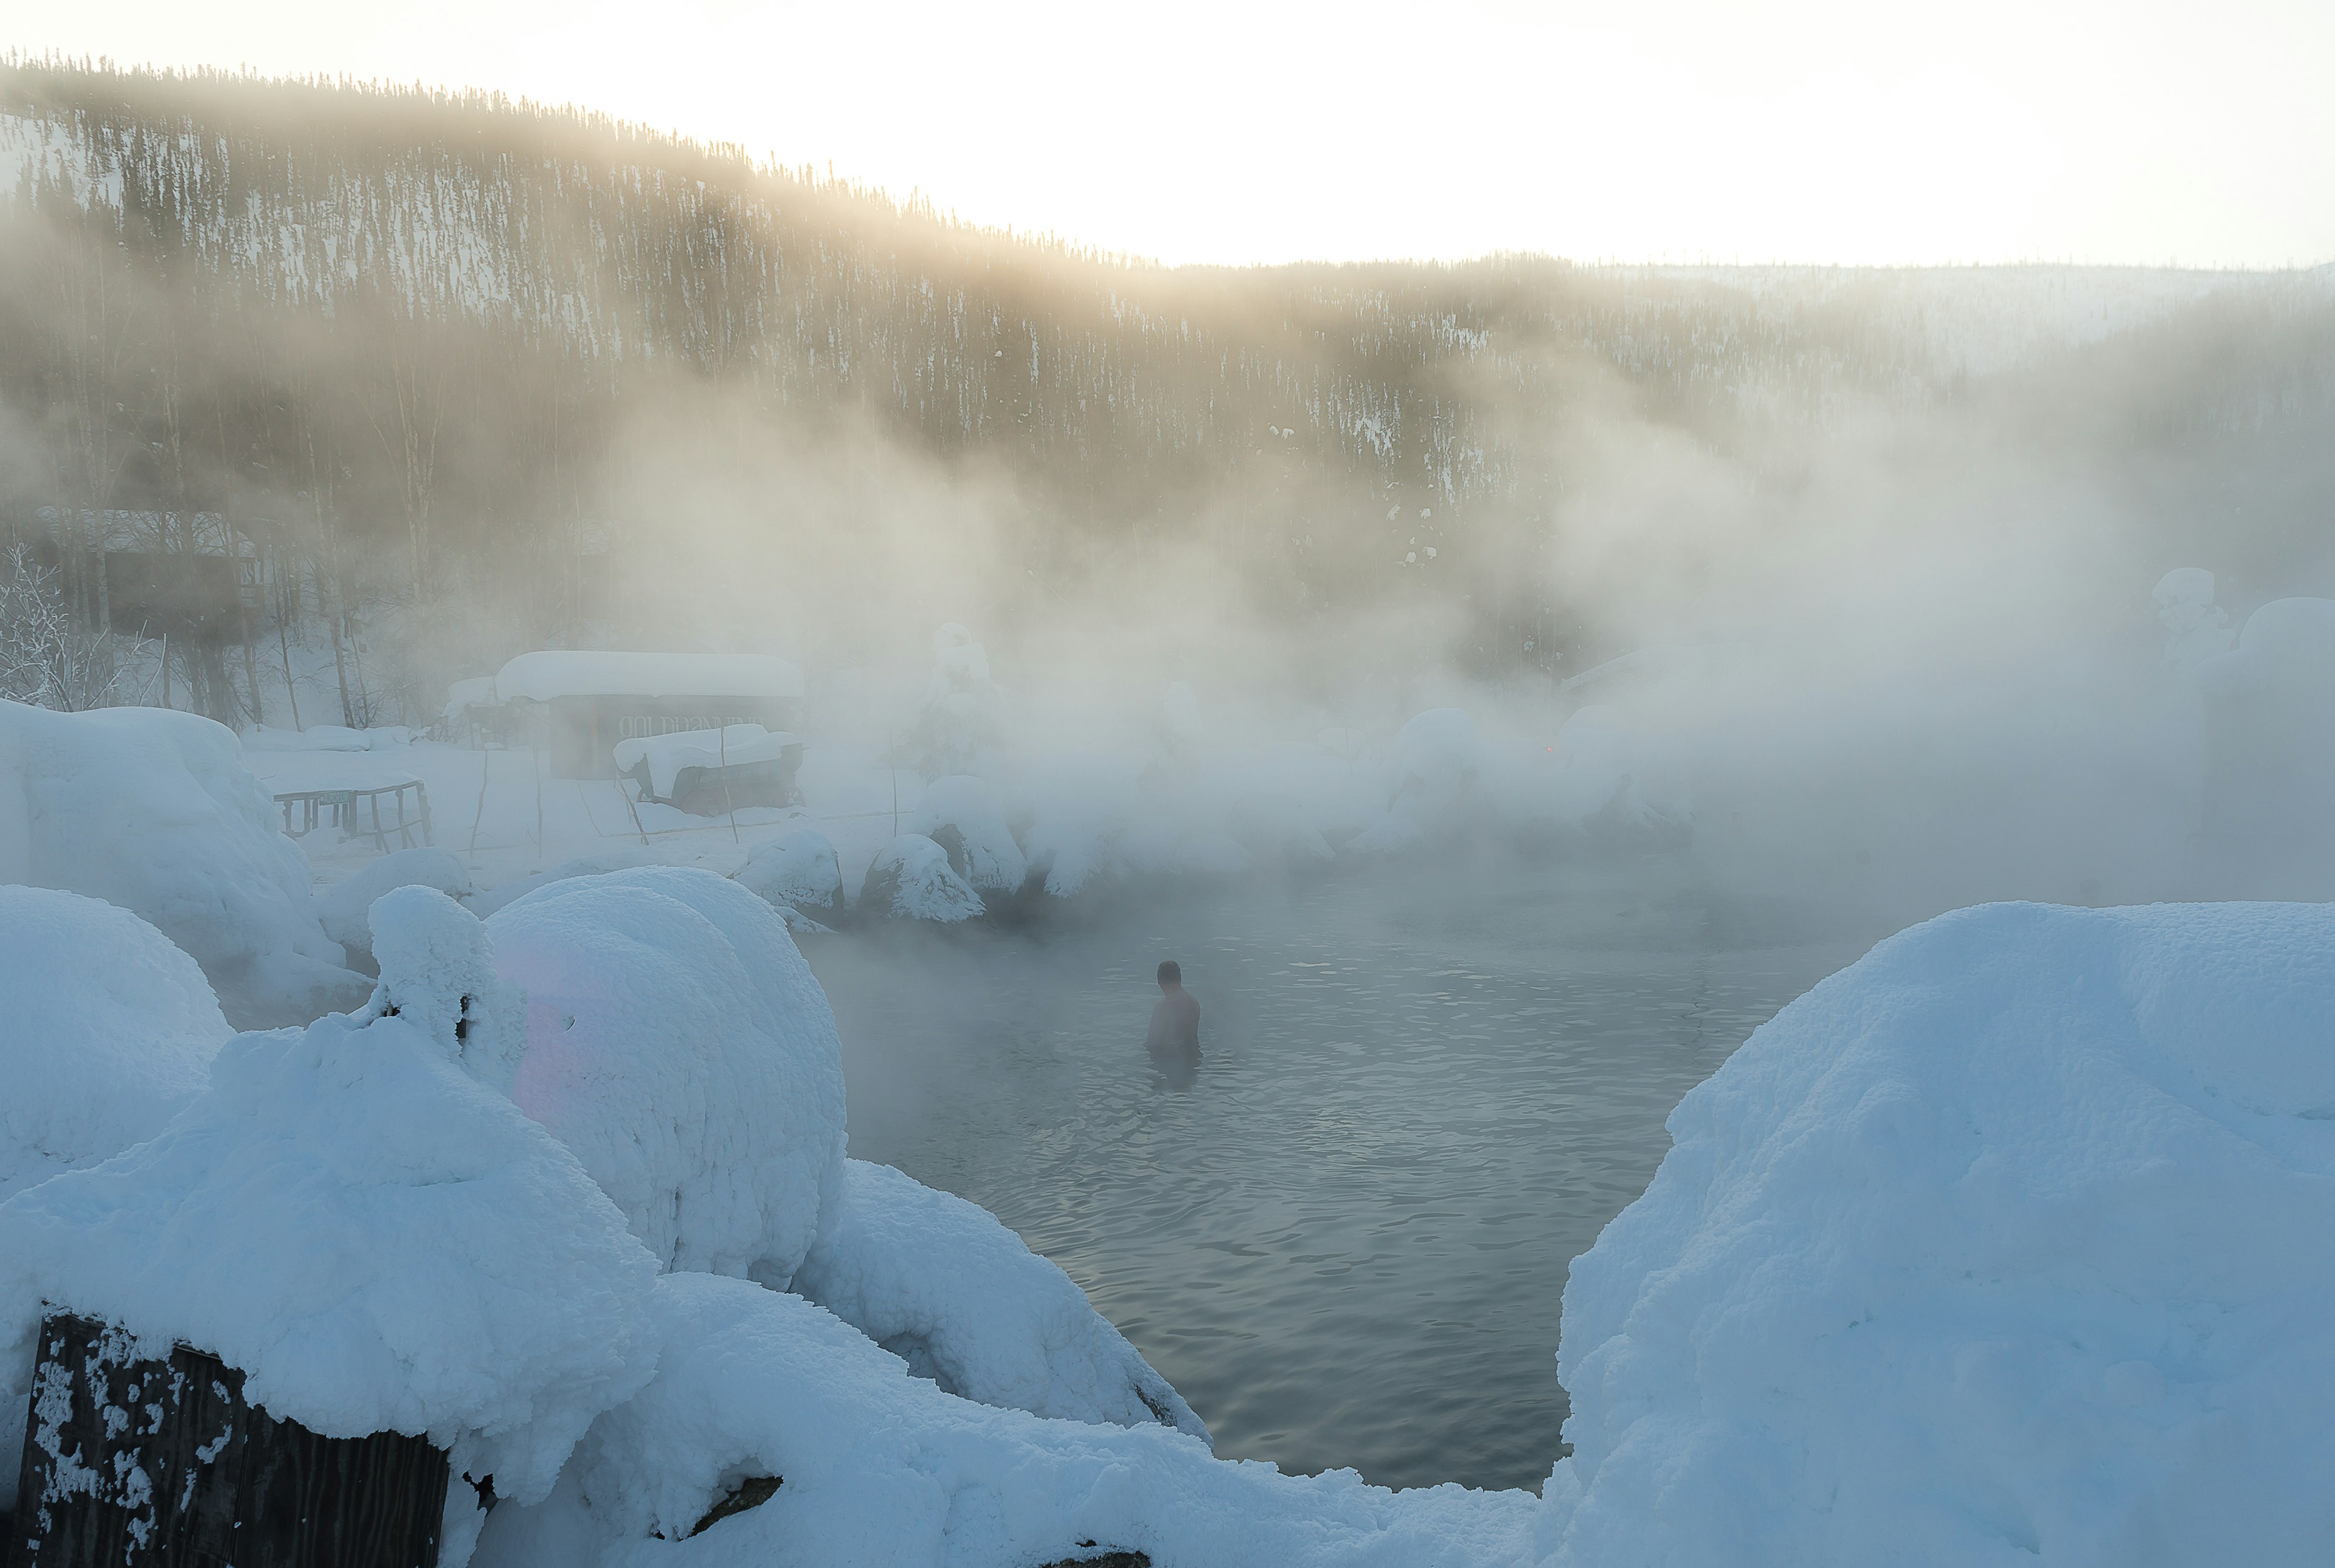 1107205433
Chena Hot Spring on the top of mountain during winter in Alaska, USA
Chena Hot Spring on the top of mountain during winter in Alaska, USA; Shutterstock ID 1107205433; your: Brian Healy; gl: 65050; netsuite: Lonely Planet Online Editorial; full: Best hot springs in the US